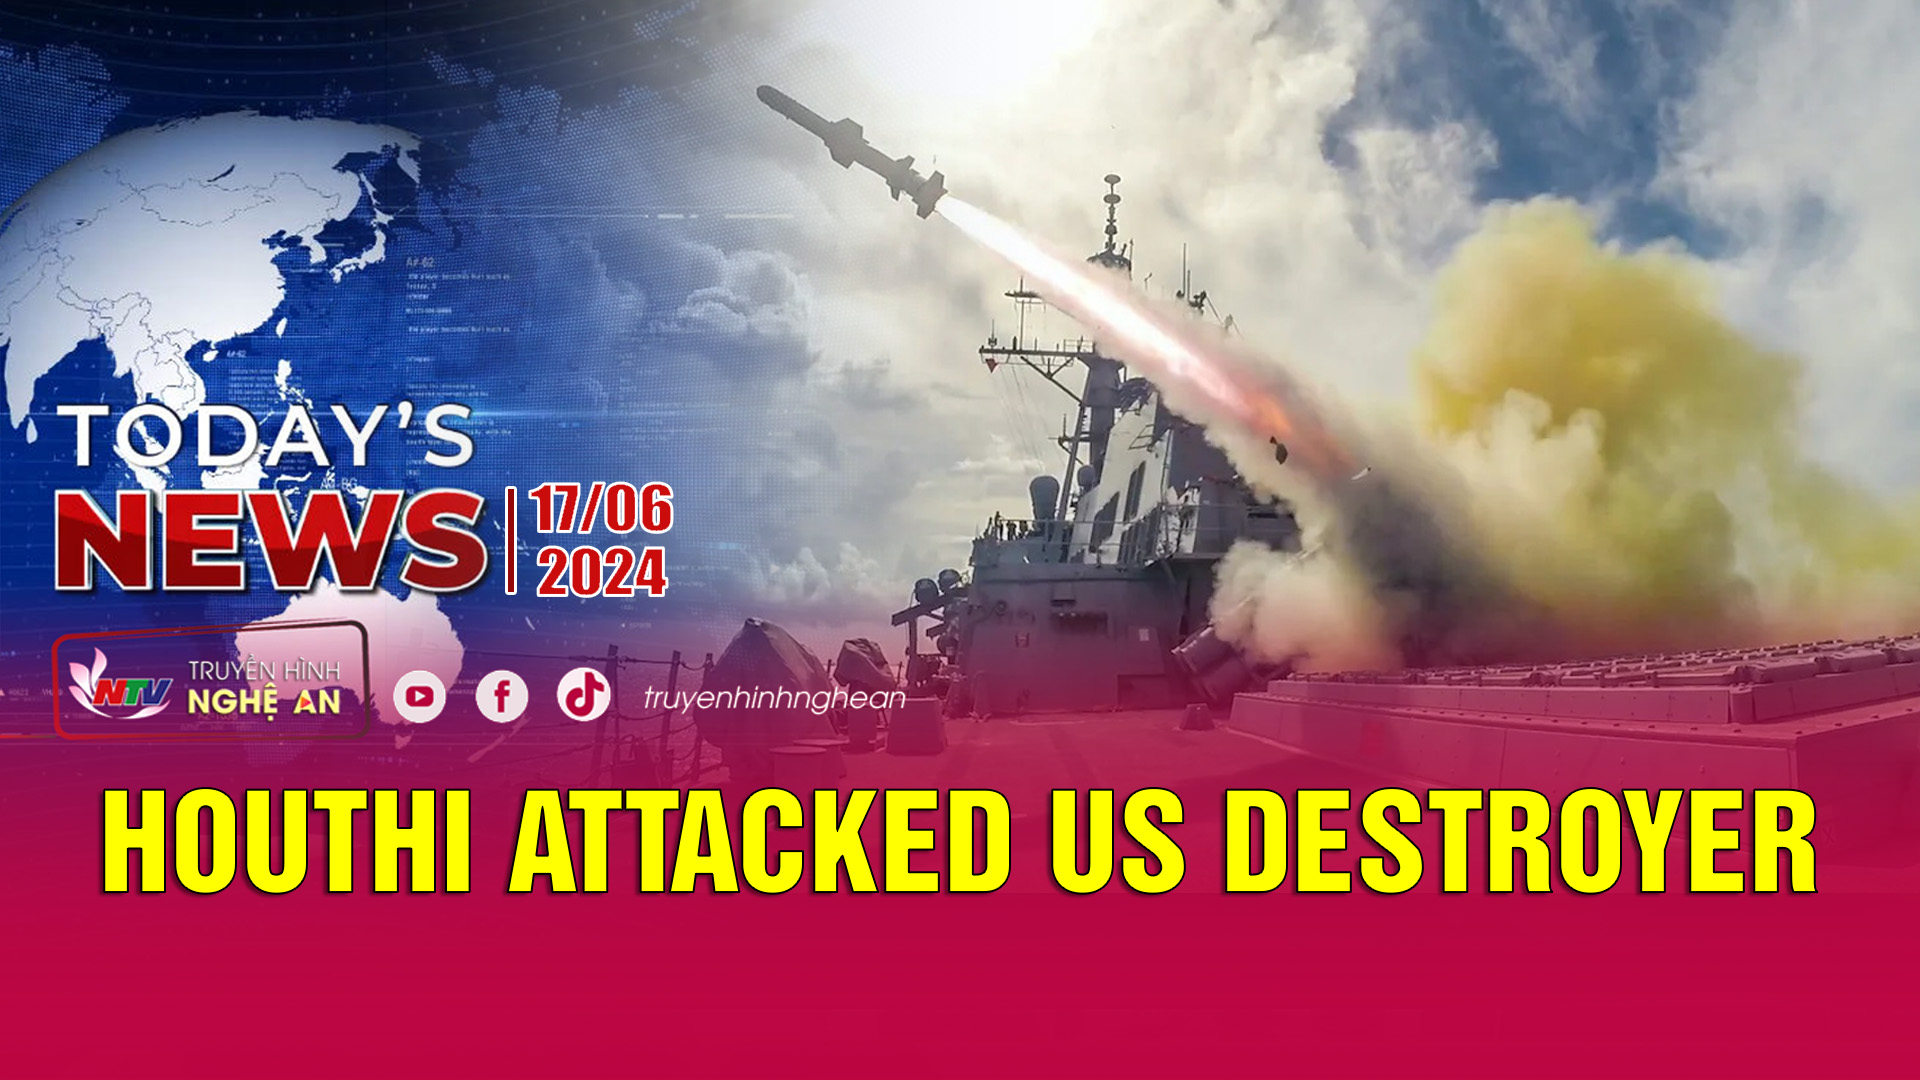 Today's News - 17/06/2024:  Houthi attacked US destroyer